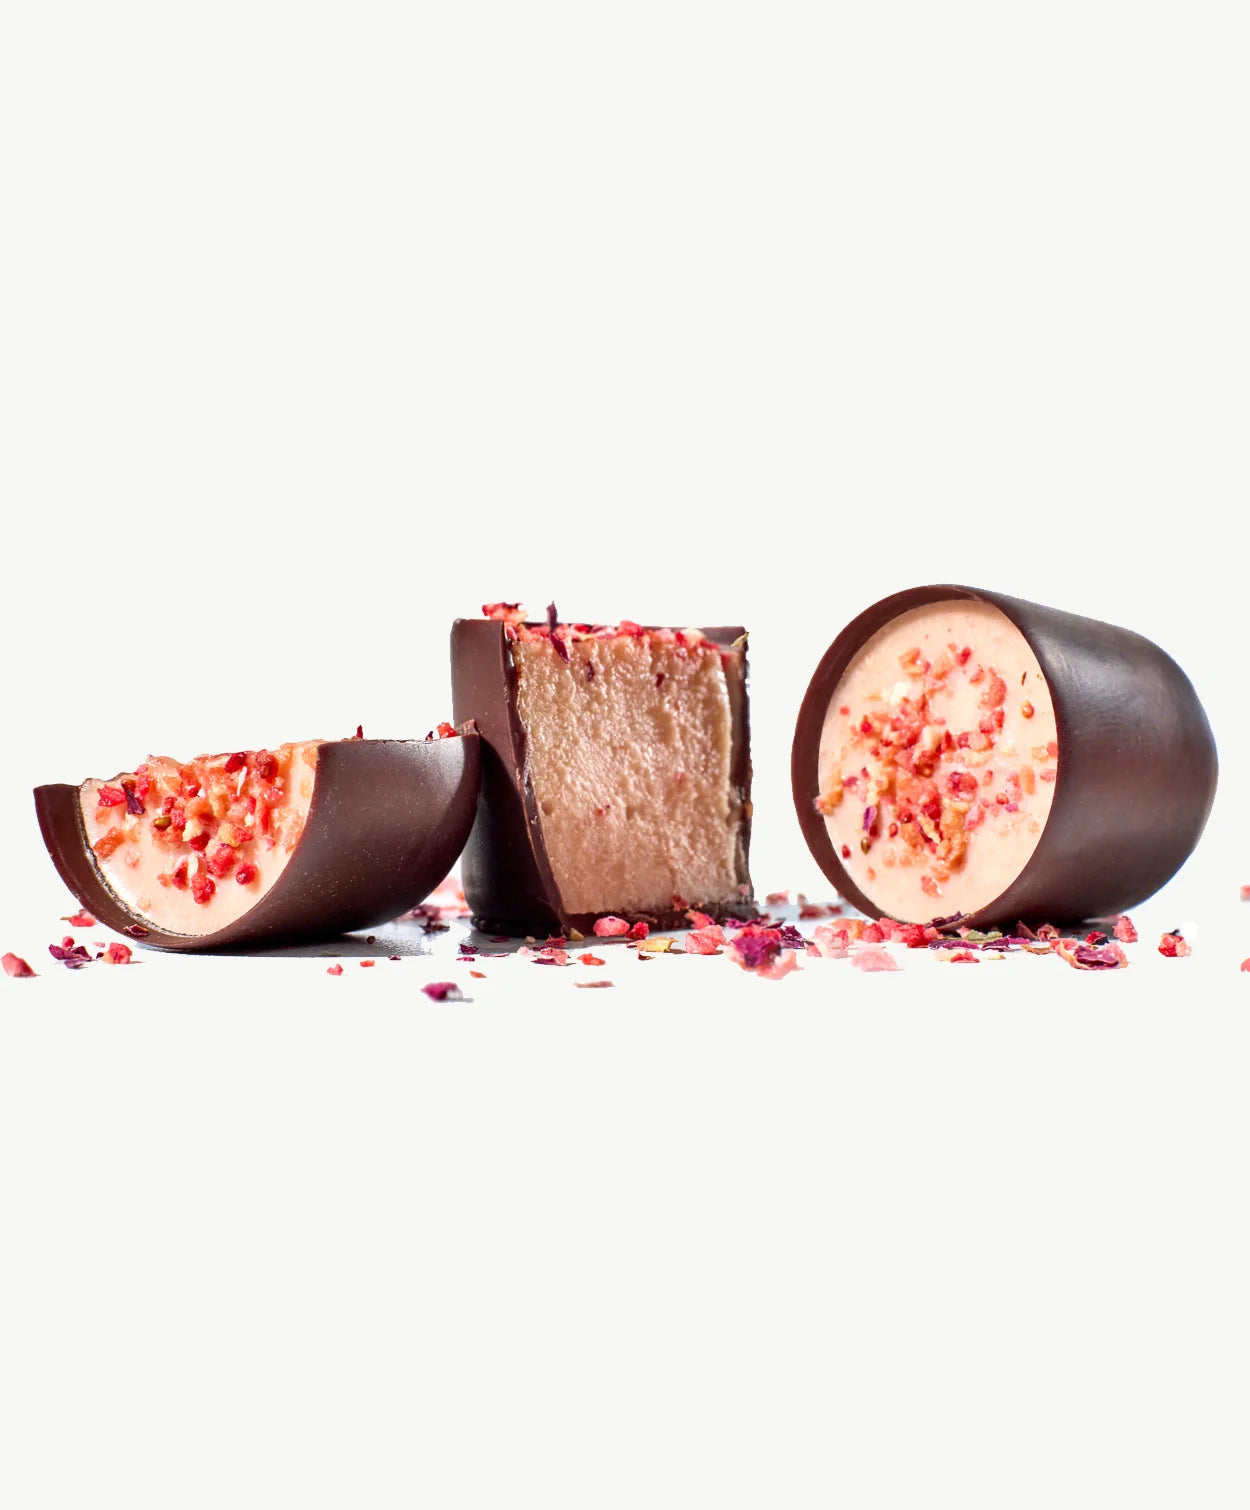 Two Vosges Strawberry Mascarpone Desert cups, one cut in half revealing pink sweet cheese in a chocolate coating topped with dragon fruit on a bed of dried rose petals on a grey background.